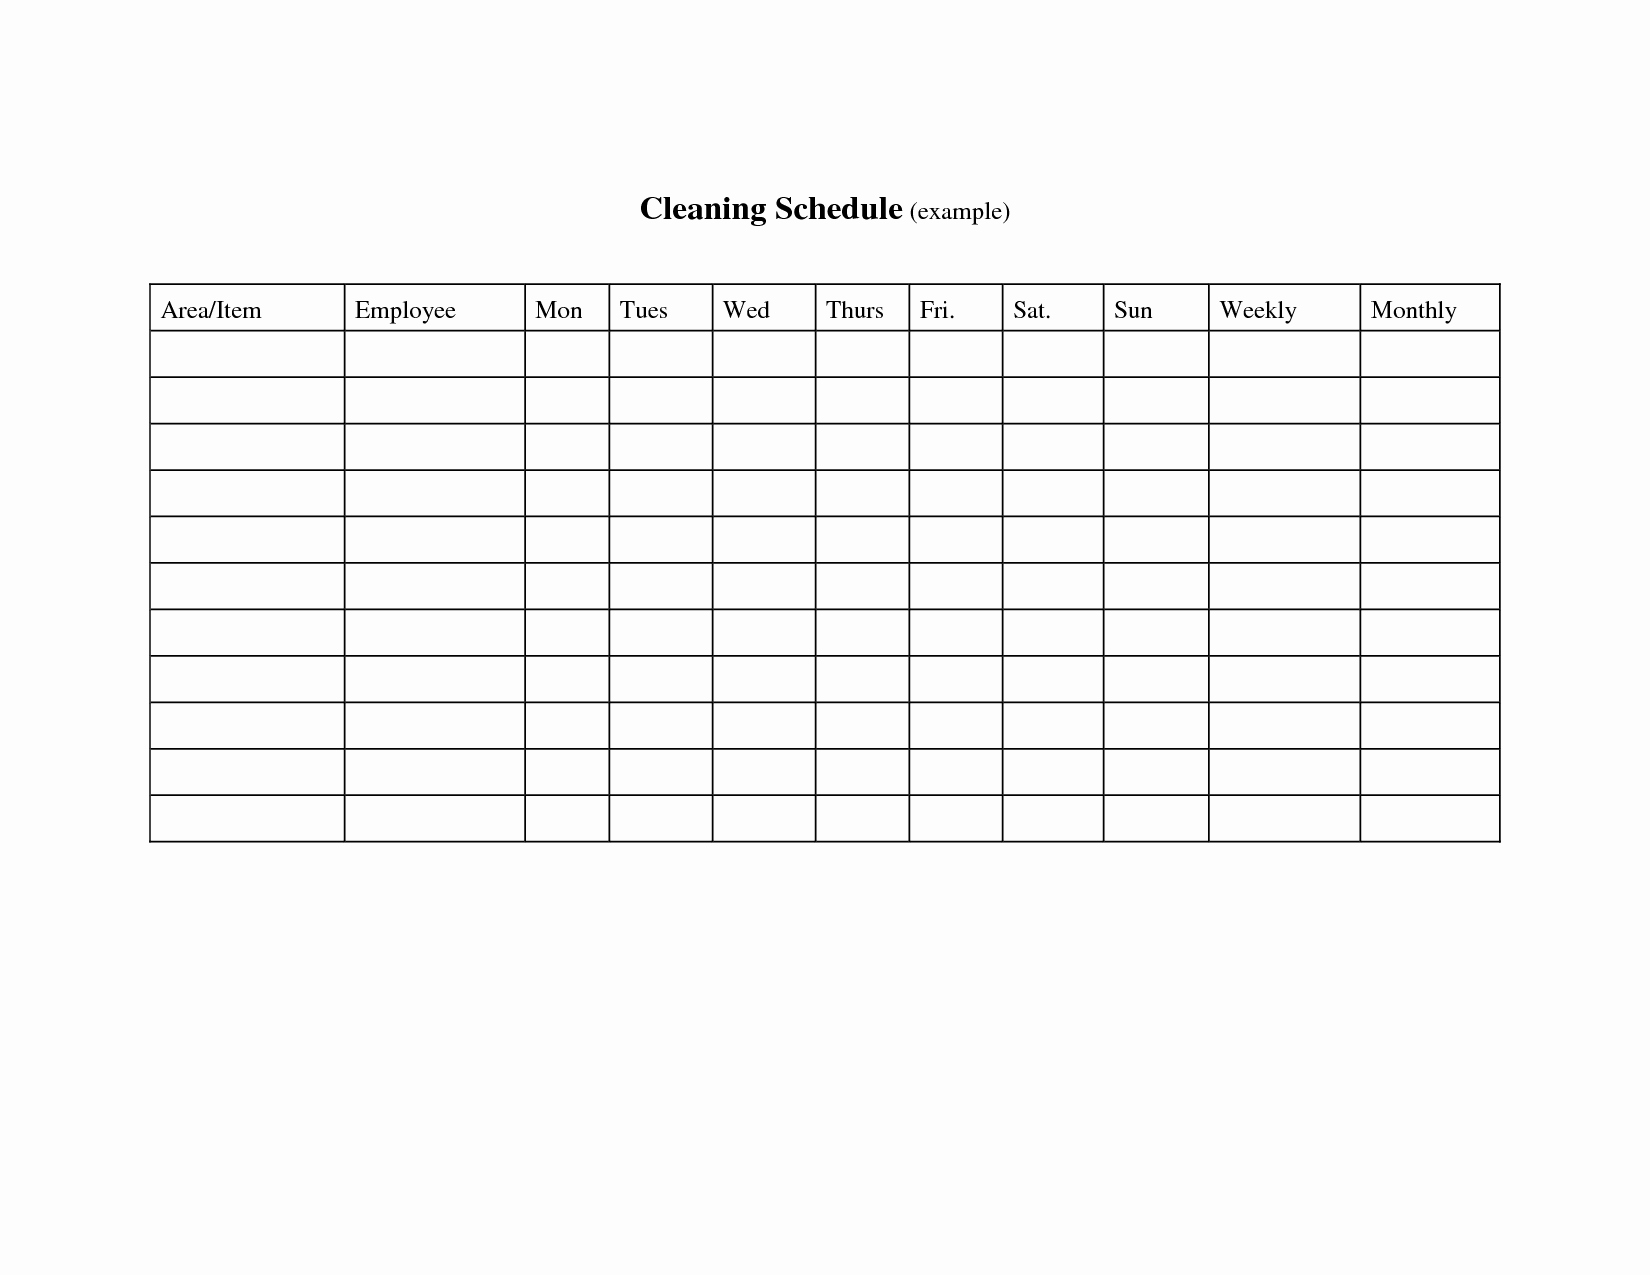 Cleaning Schedule Template for Home New Blank Daily Cleaning Schedule and Record Sheet Fice